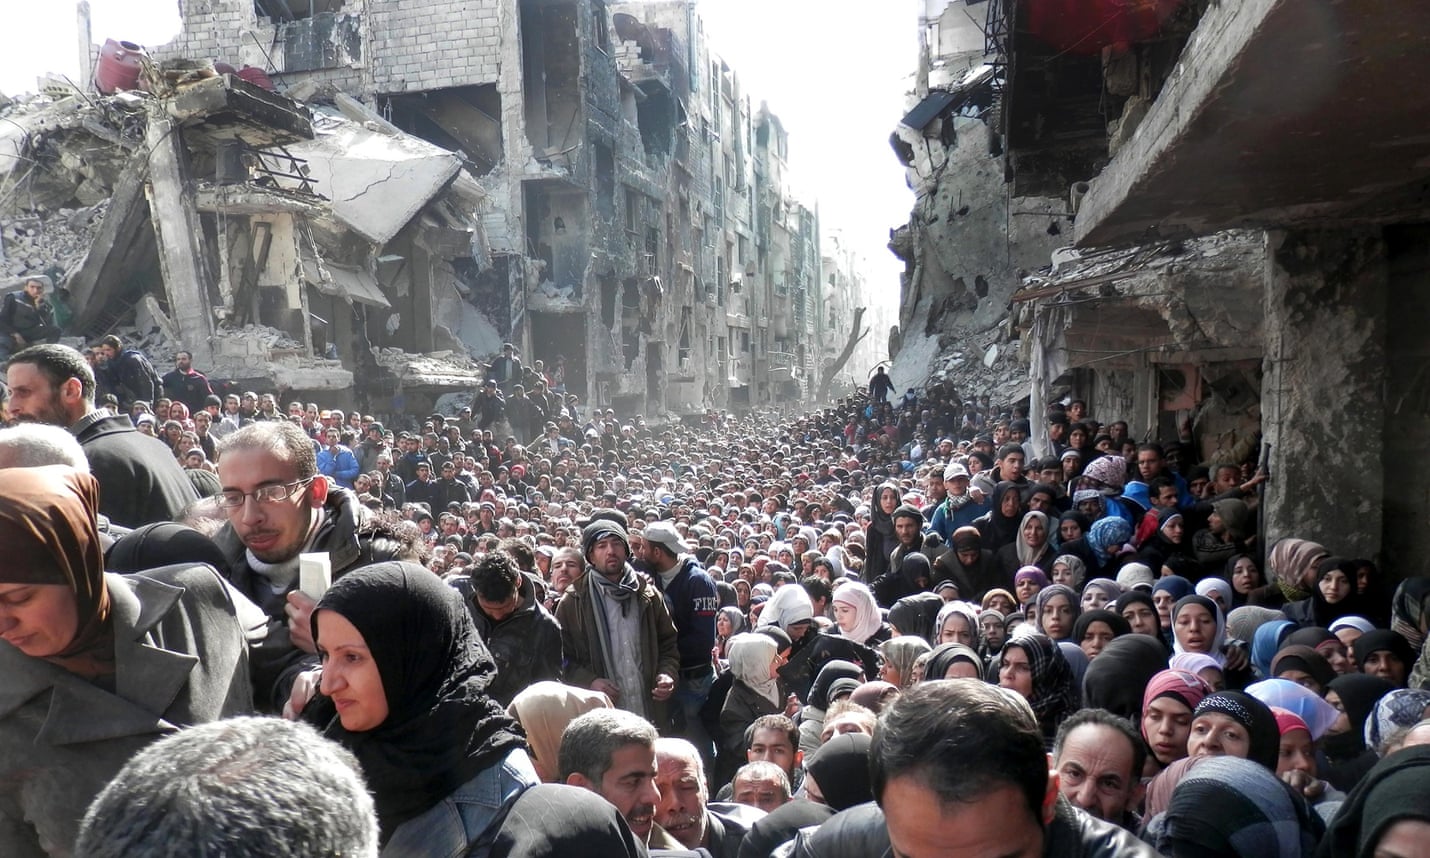 Palestinian refugees in Yarmouk, Damascus, queueing for food.